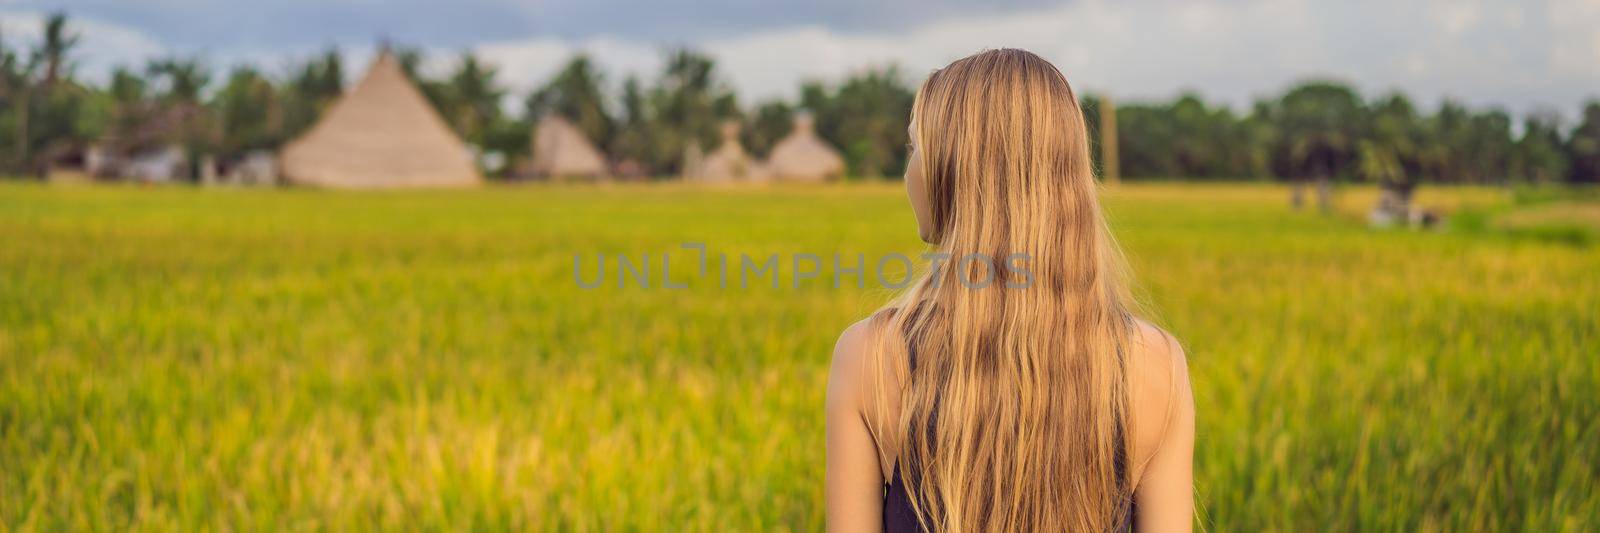 Women tourists enjoy the panoramic view of the beautiful Asian scenery of rice fields. BANNER, LONG FORMAT